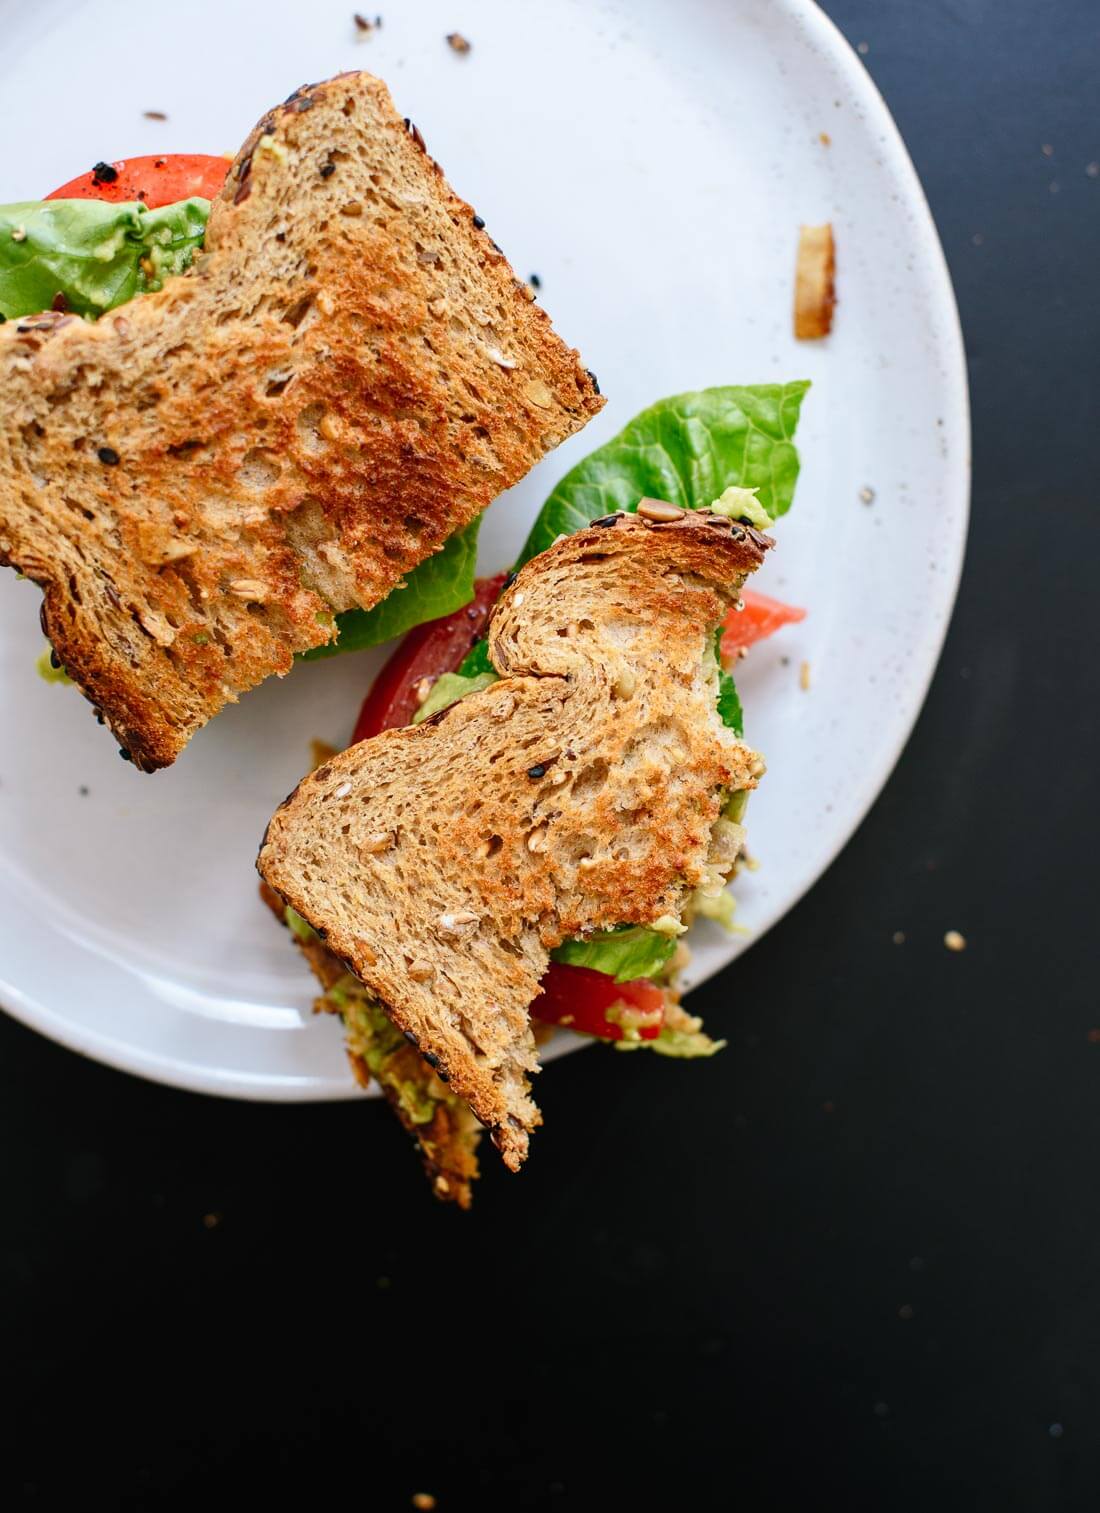 A healthier "BLT" sandwich made with coconut bacon, lettuce, tomato and avocado! cookieandkate.com